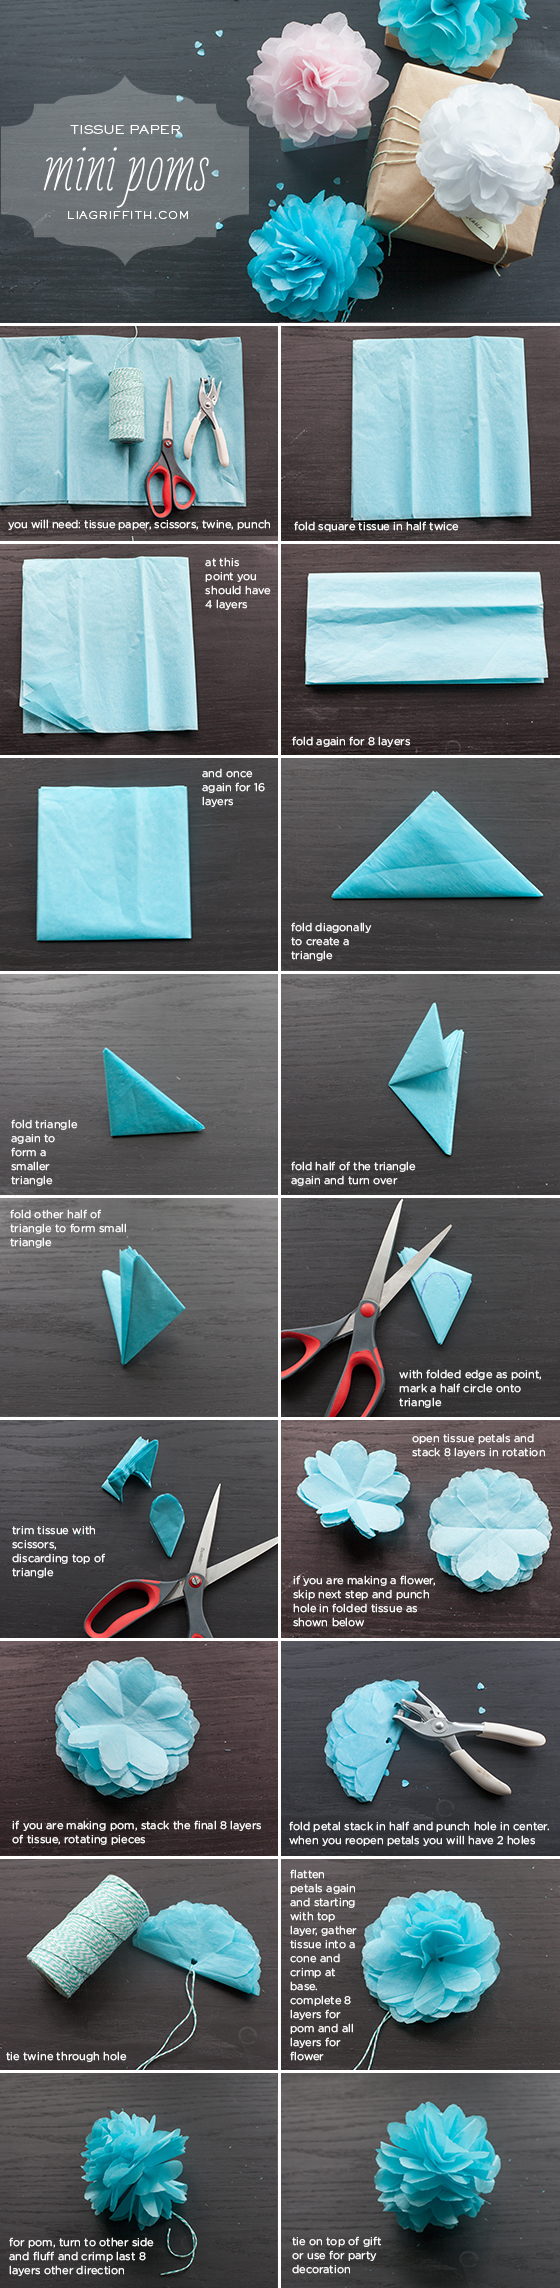 How to Make Tissue Paper Flowers Four Ways